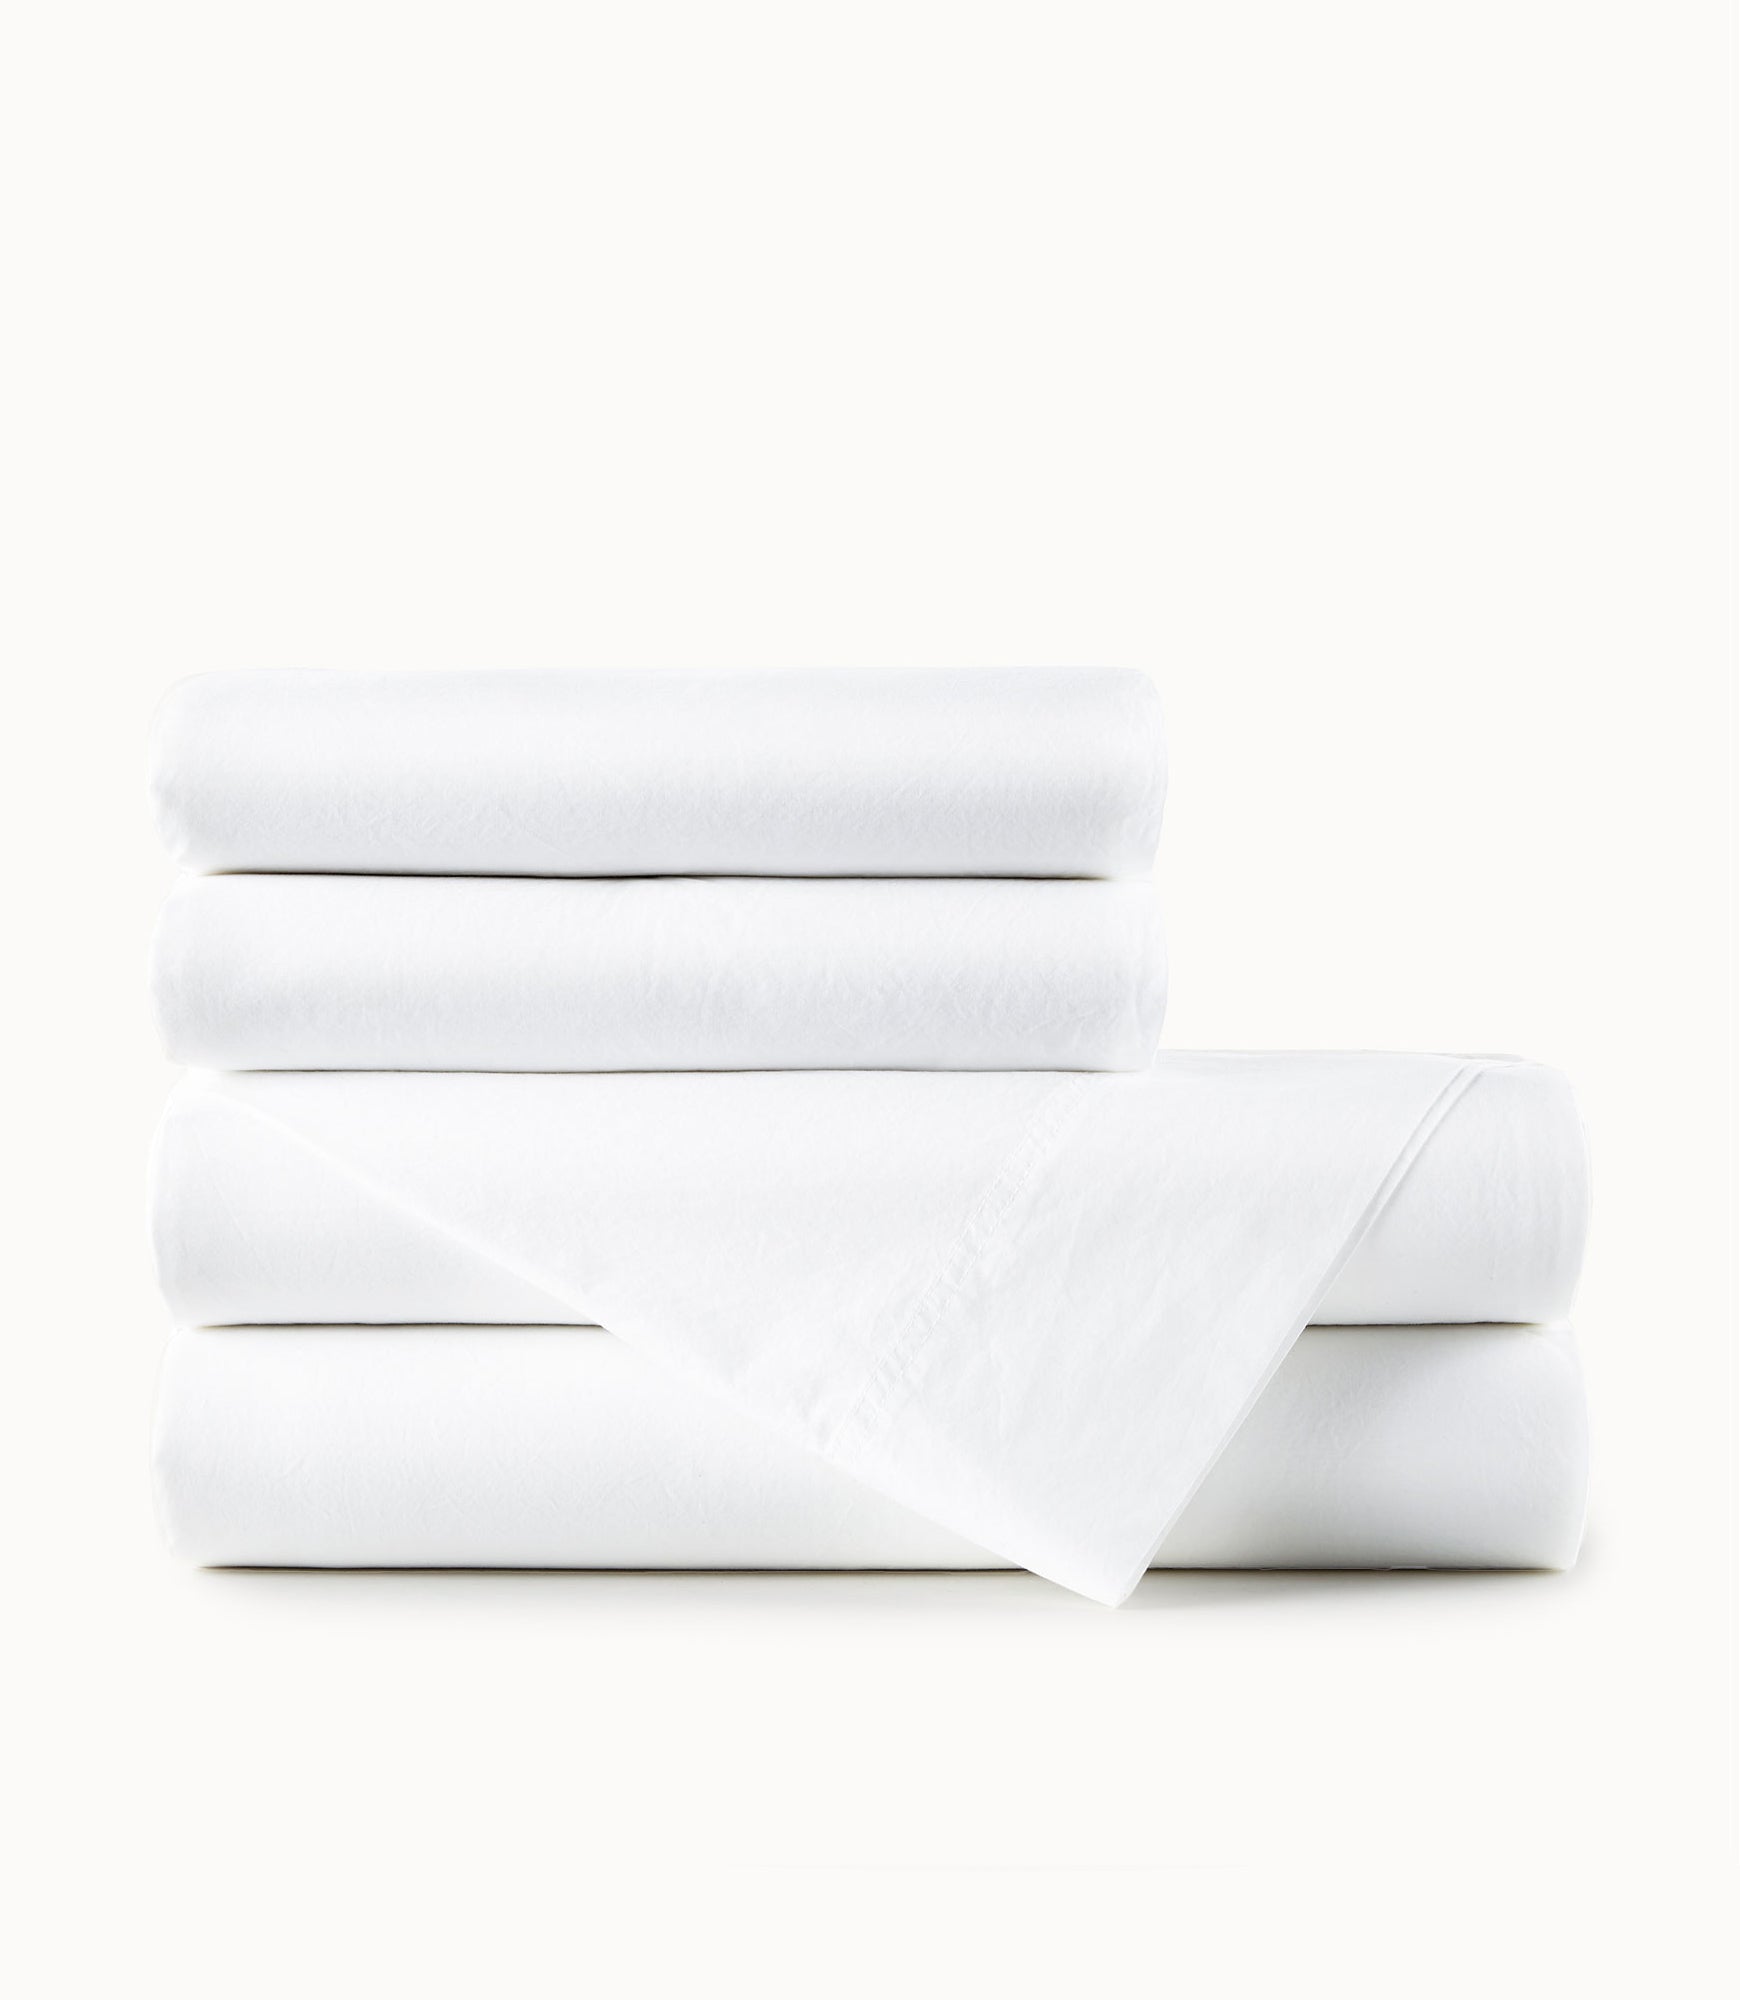 Long Style Matt Black Tissue Box Cover - Hotel Complimentary Products